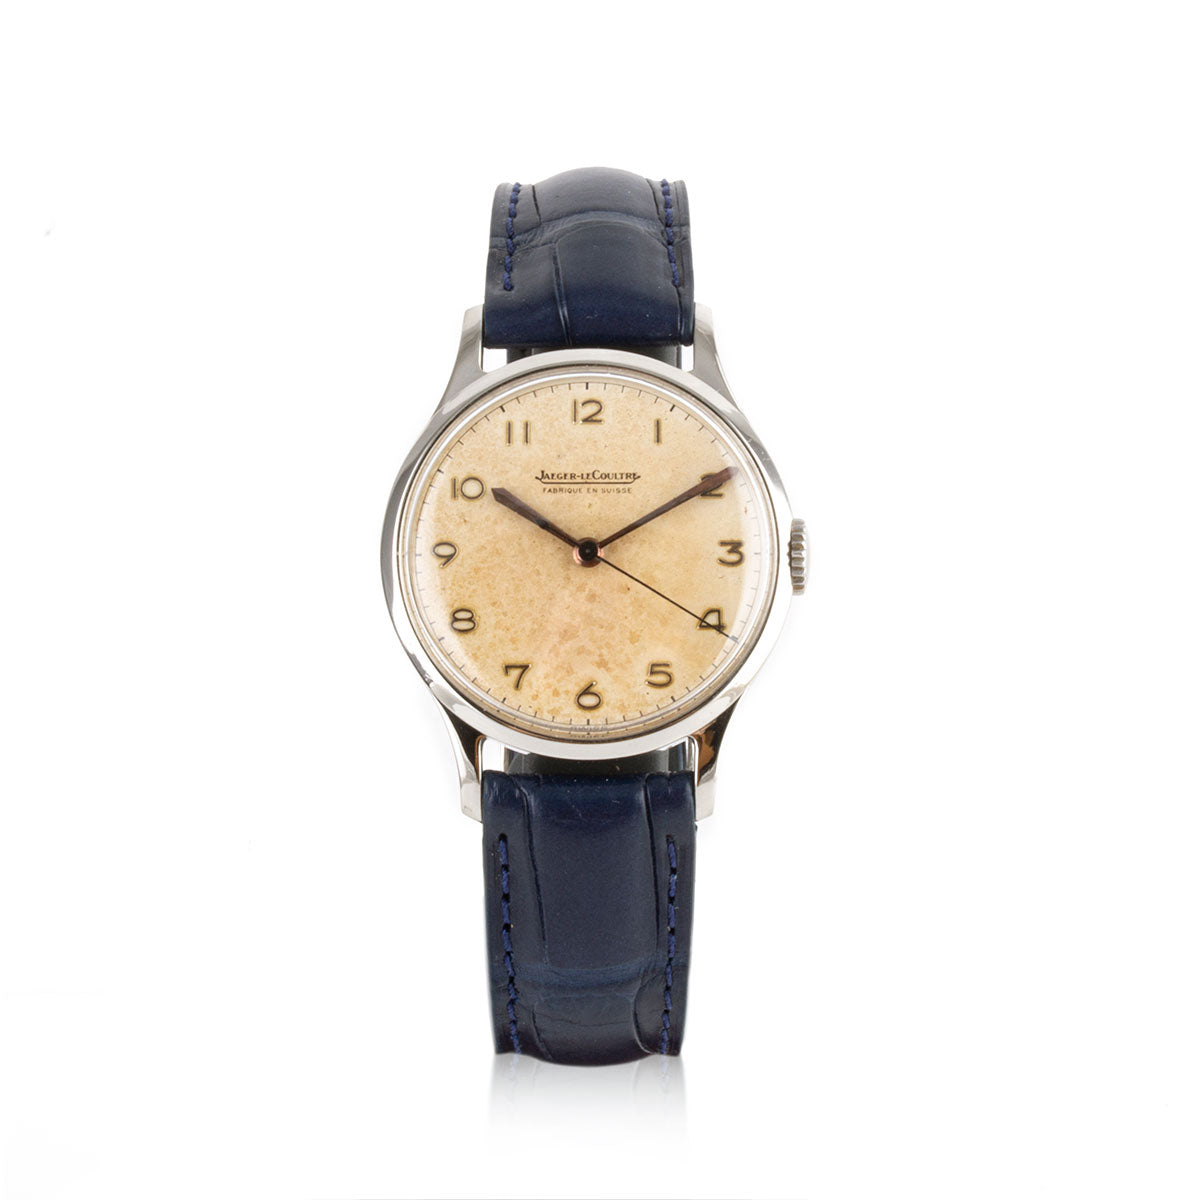 ​Second-hand watch - Jaeger Lecoultre - 1800€